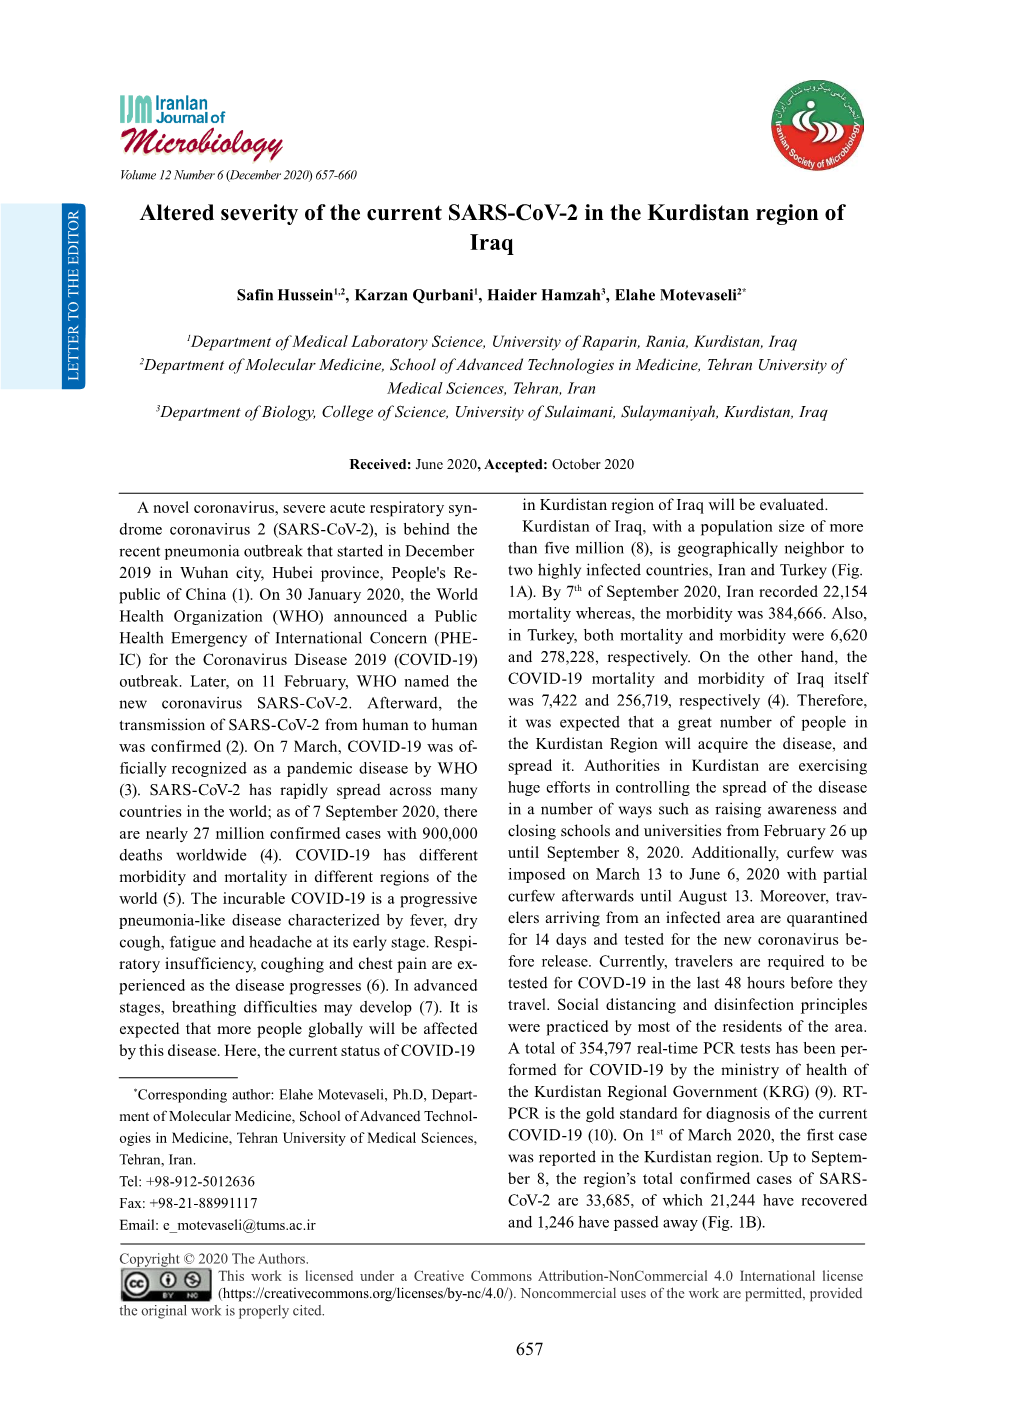 Altered Severity of the Current SARS-Cov-2 in the Kurdistan Region Of